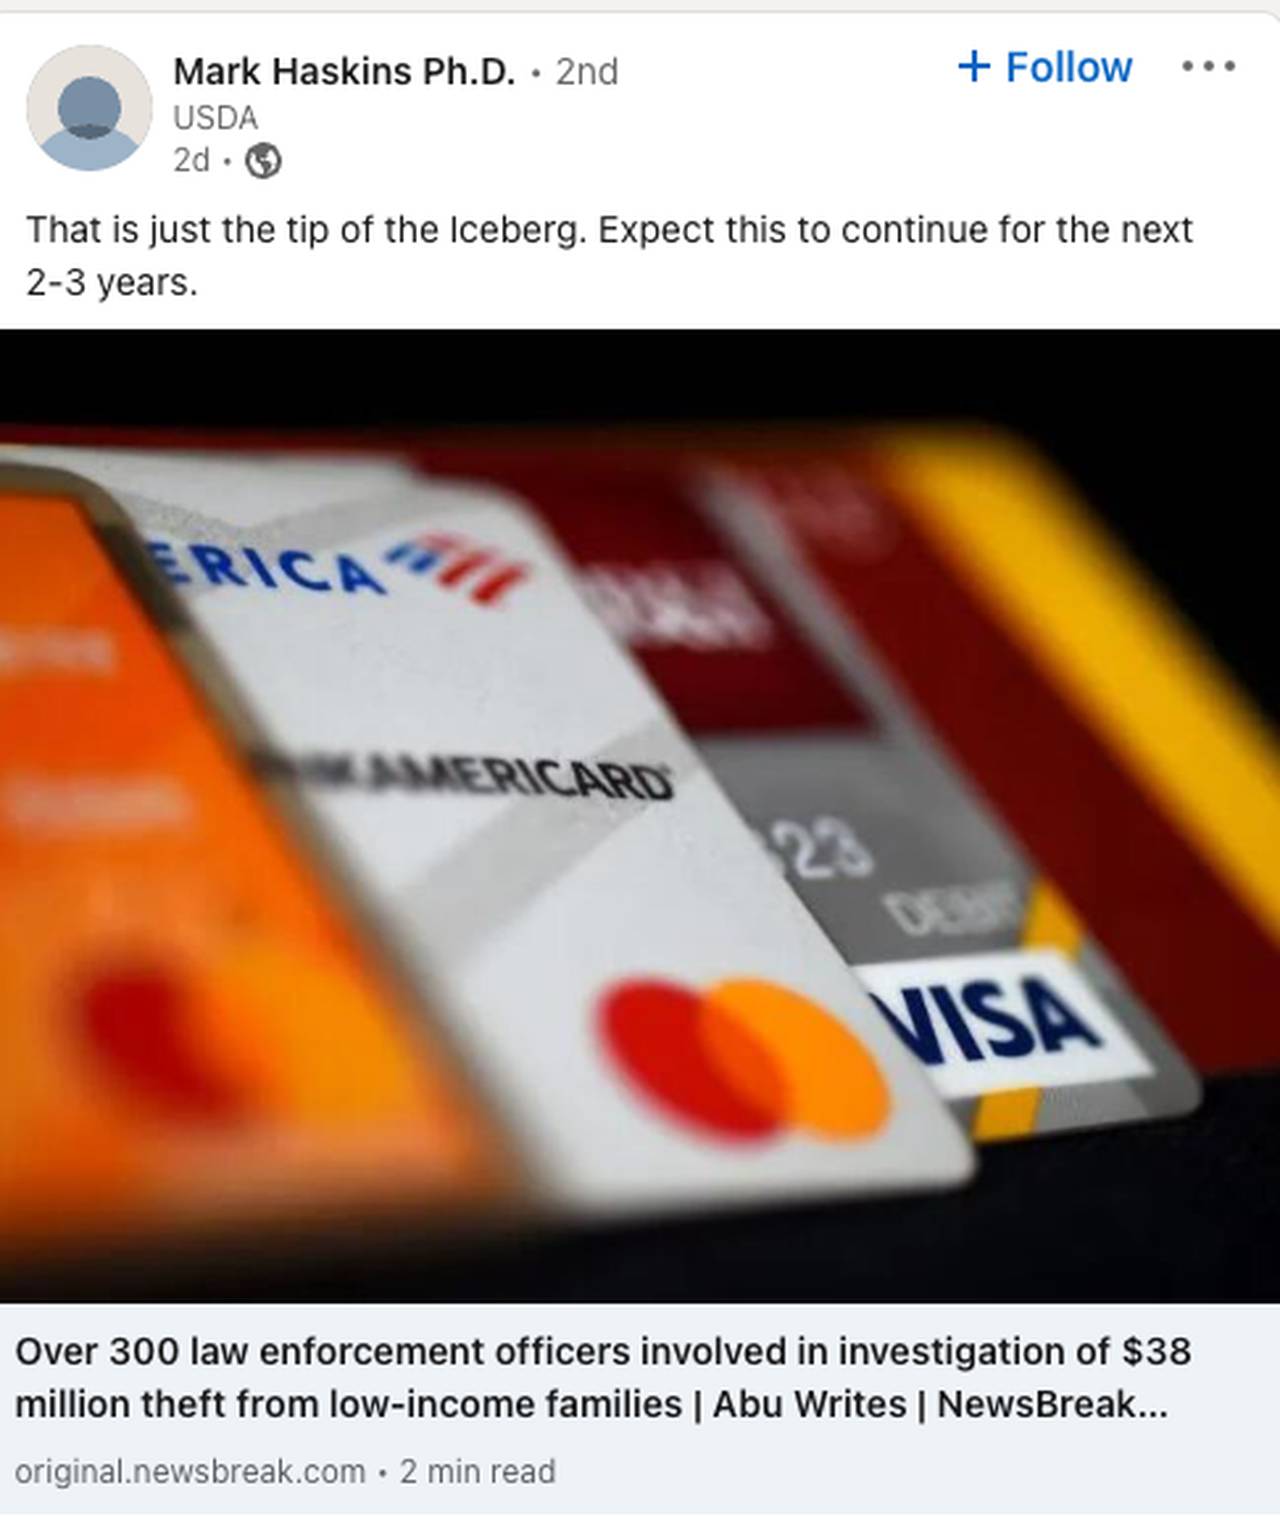 SNAP Scam Alerts: EBT Card Skimming and Phishing Scams